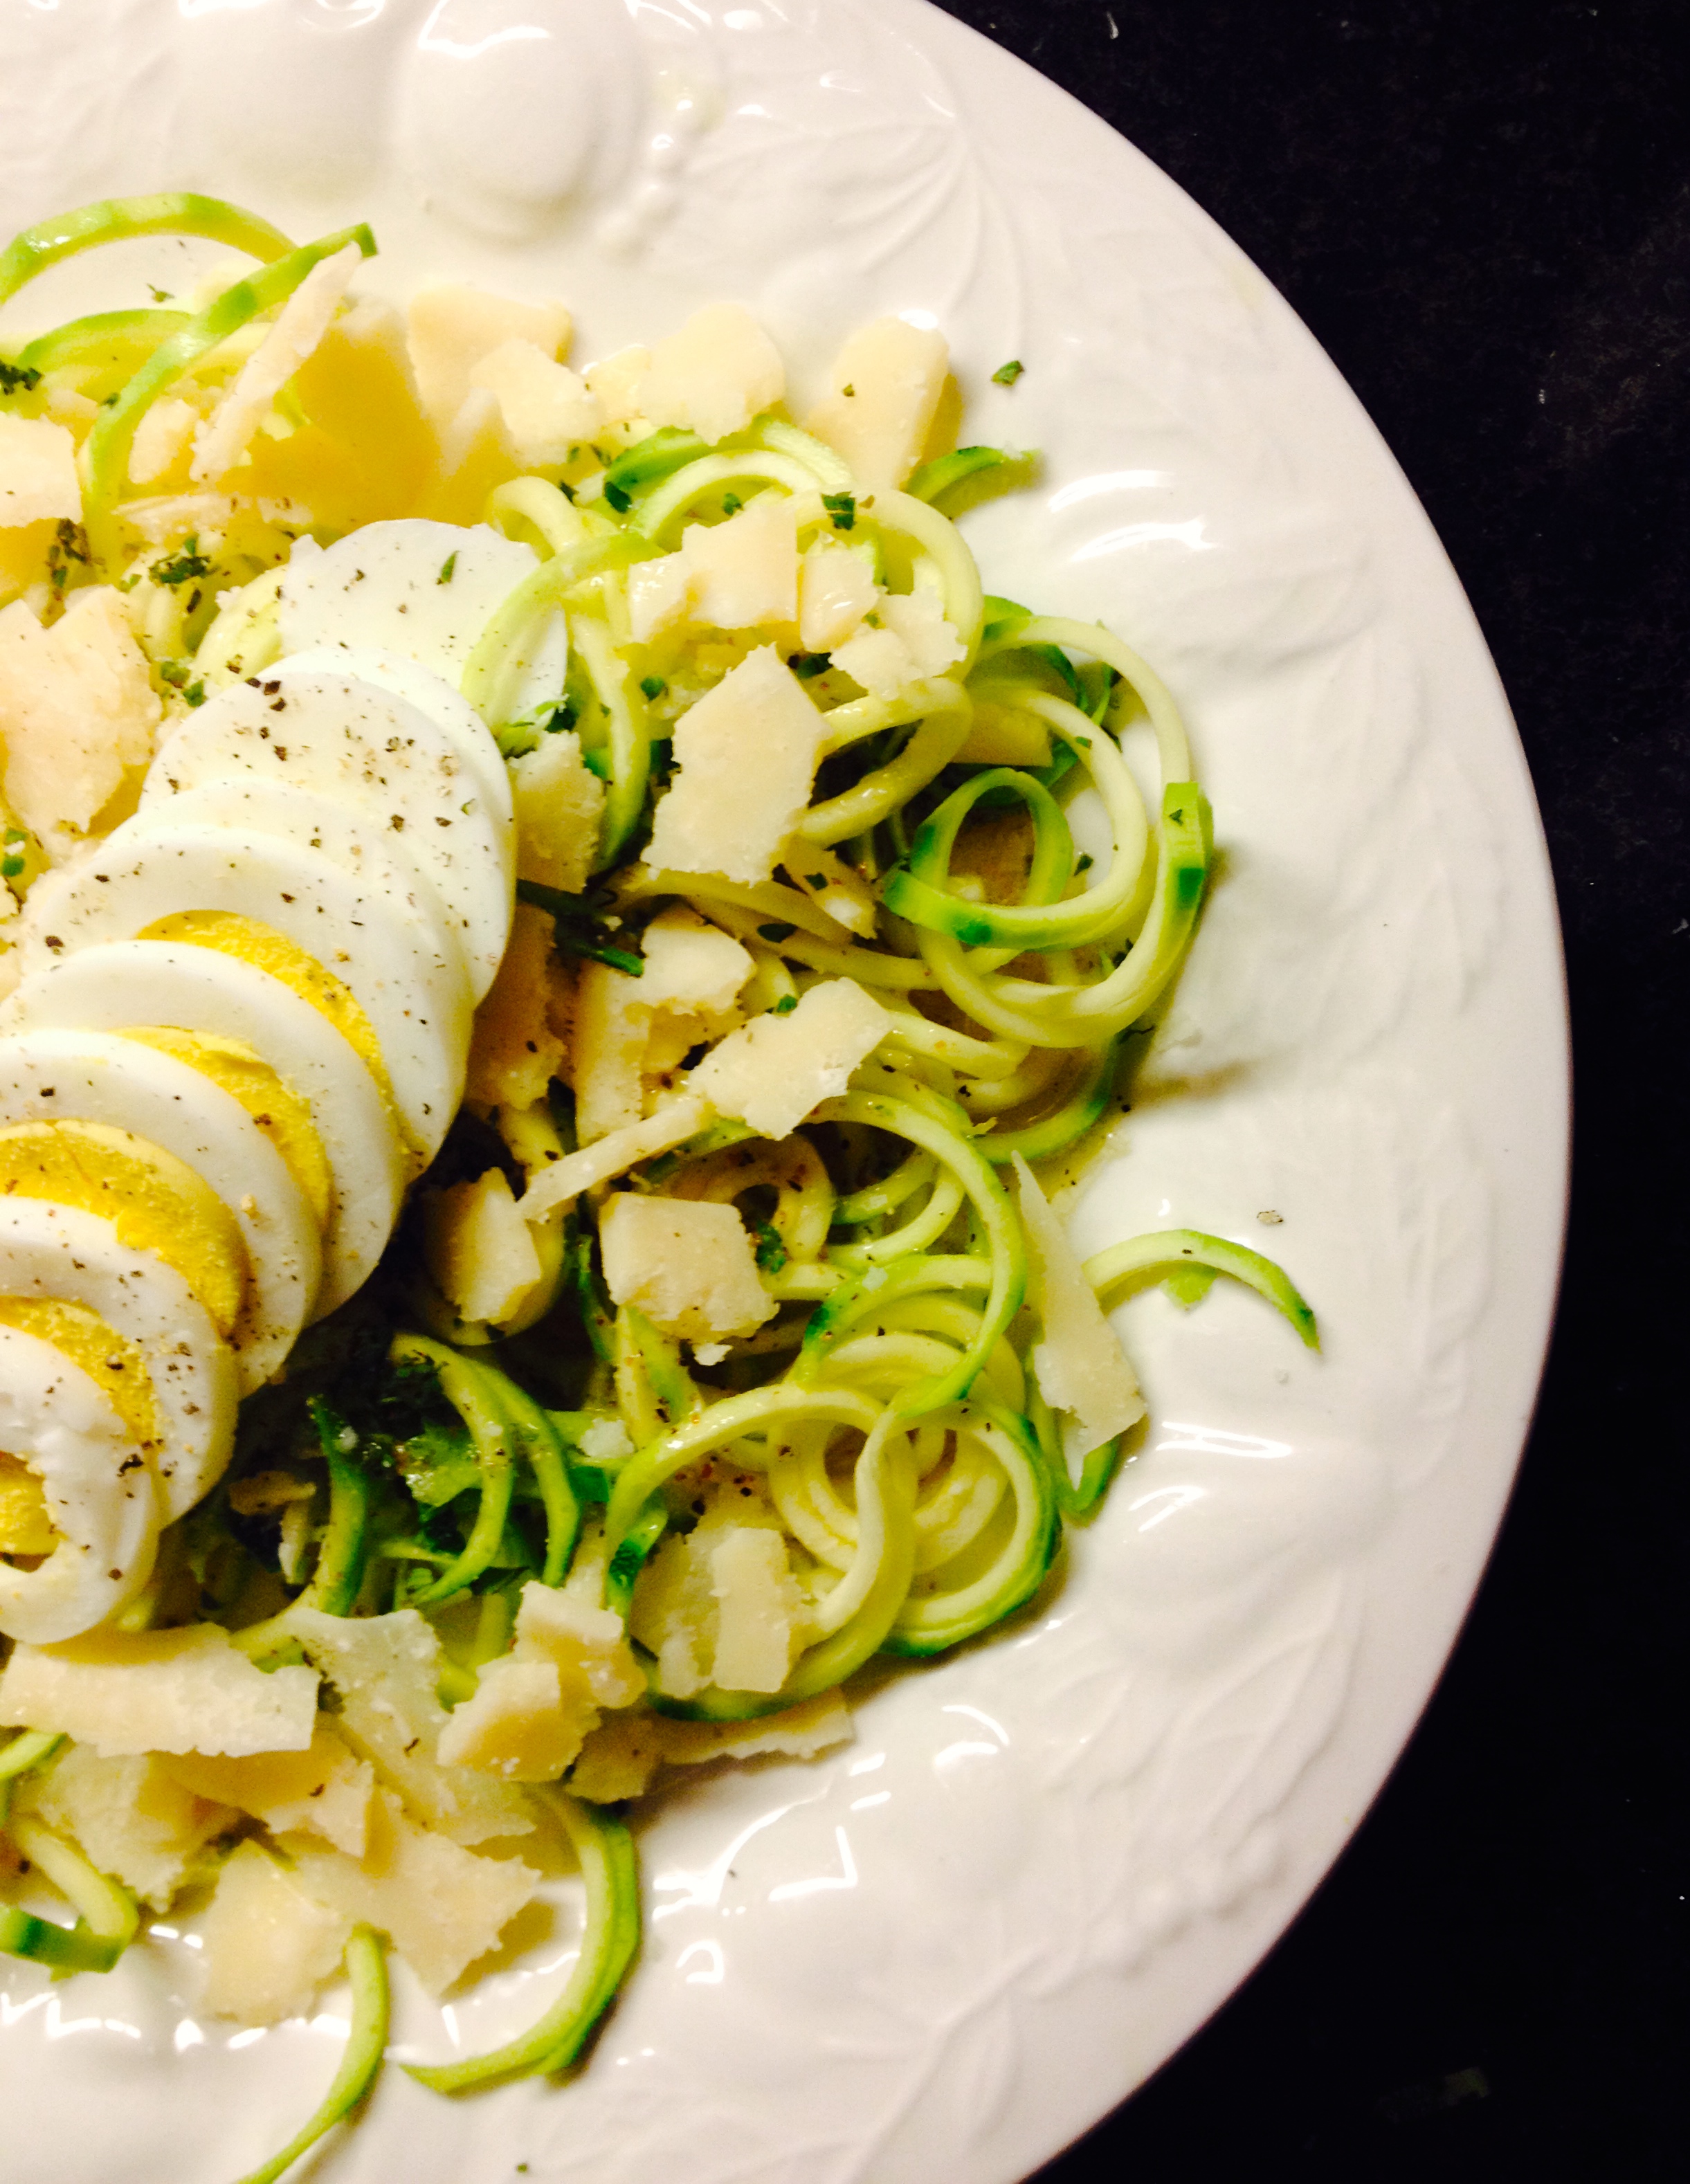 lemony zucchini zoodle salad with egg and parmesan :: by radish*rose